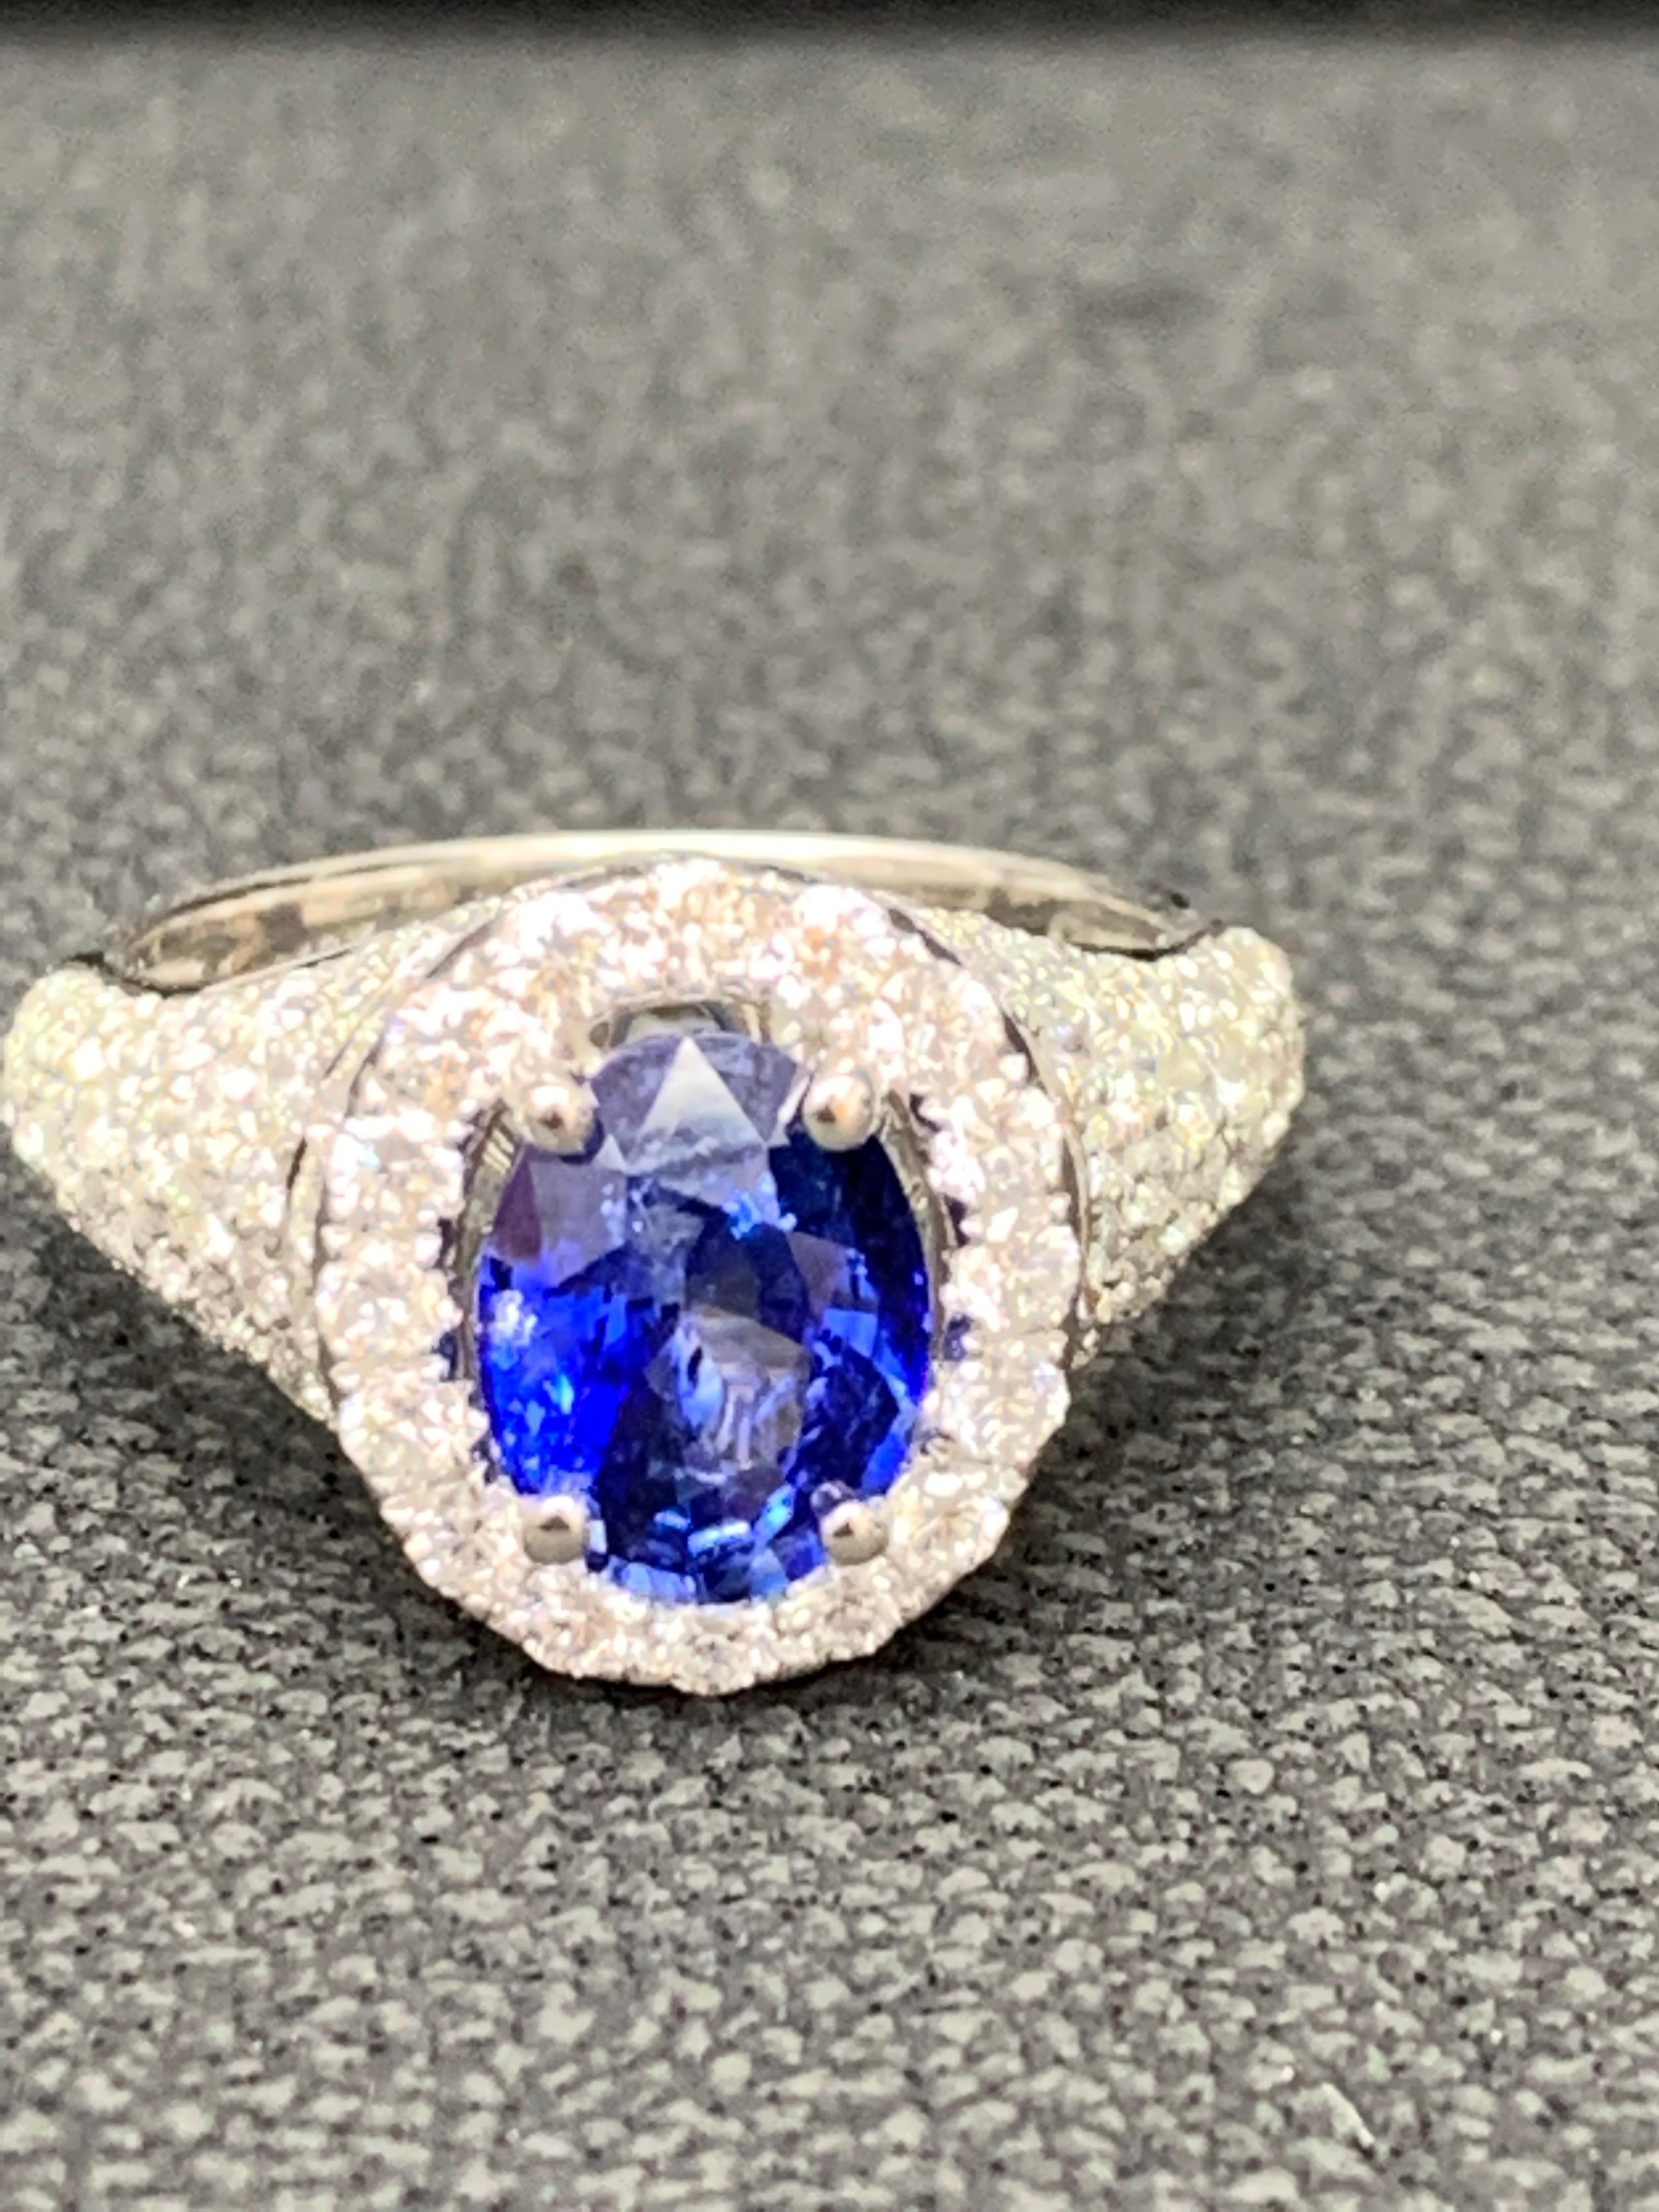 A uniquely-designed ring showcasing a 1.81 Carat Oval Cut Blue Sapphire. Surrounding the center stone are brilliant-cut round diamonds in an 18 karat white gold mounting. 112 diamonds weigh 1.77 carat in total.